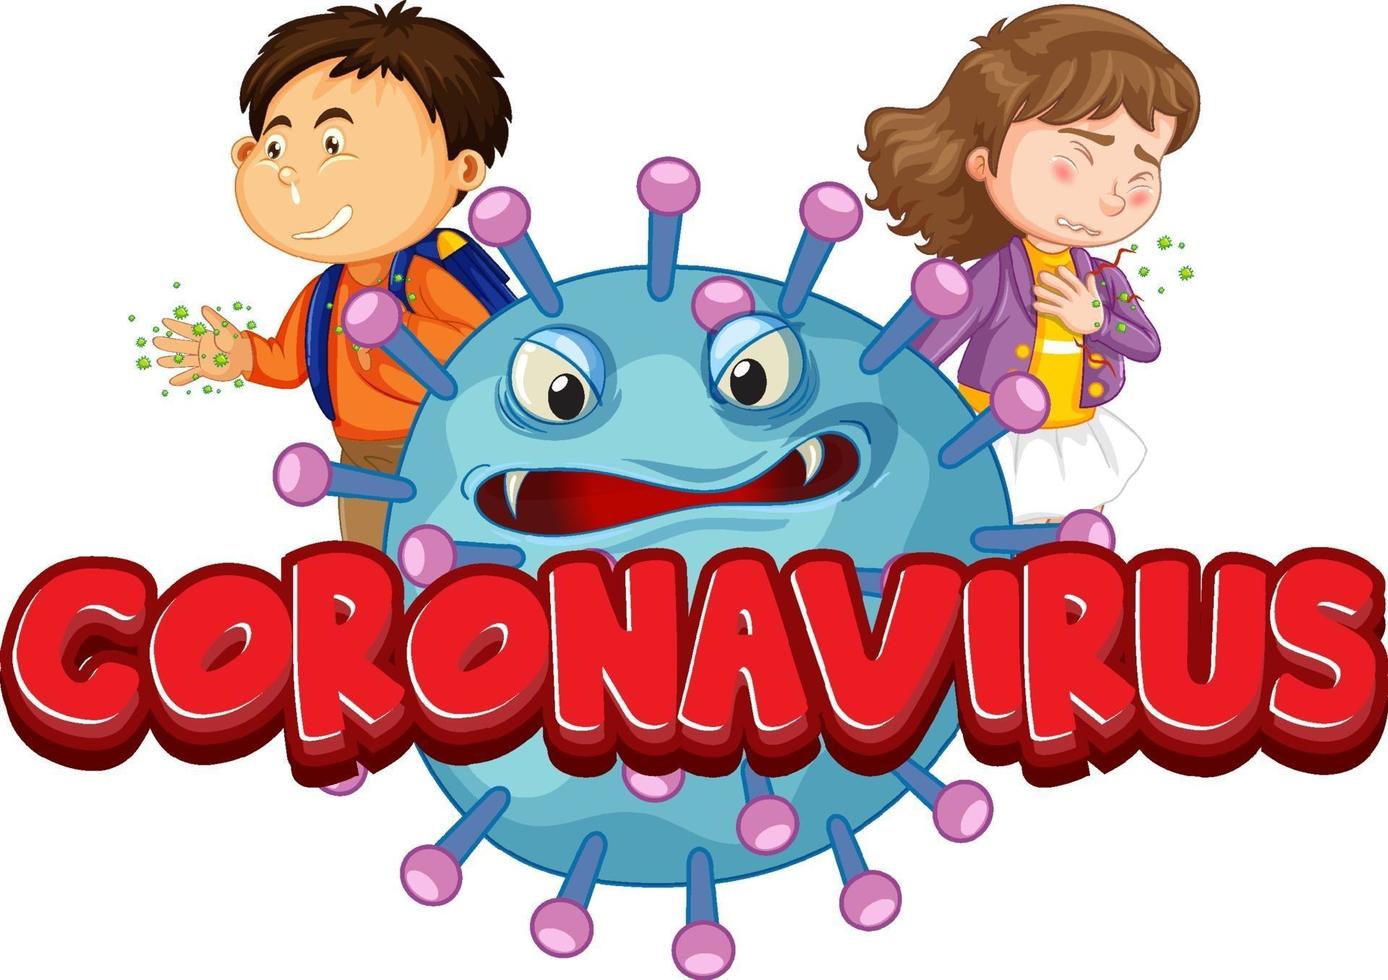 Coronavirus font design with covid19 icon and kids character vector